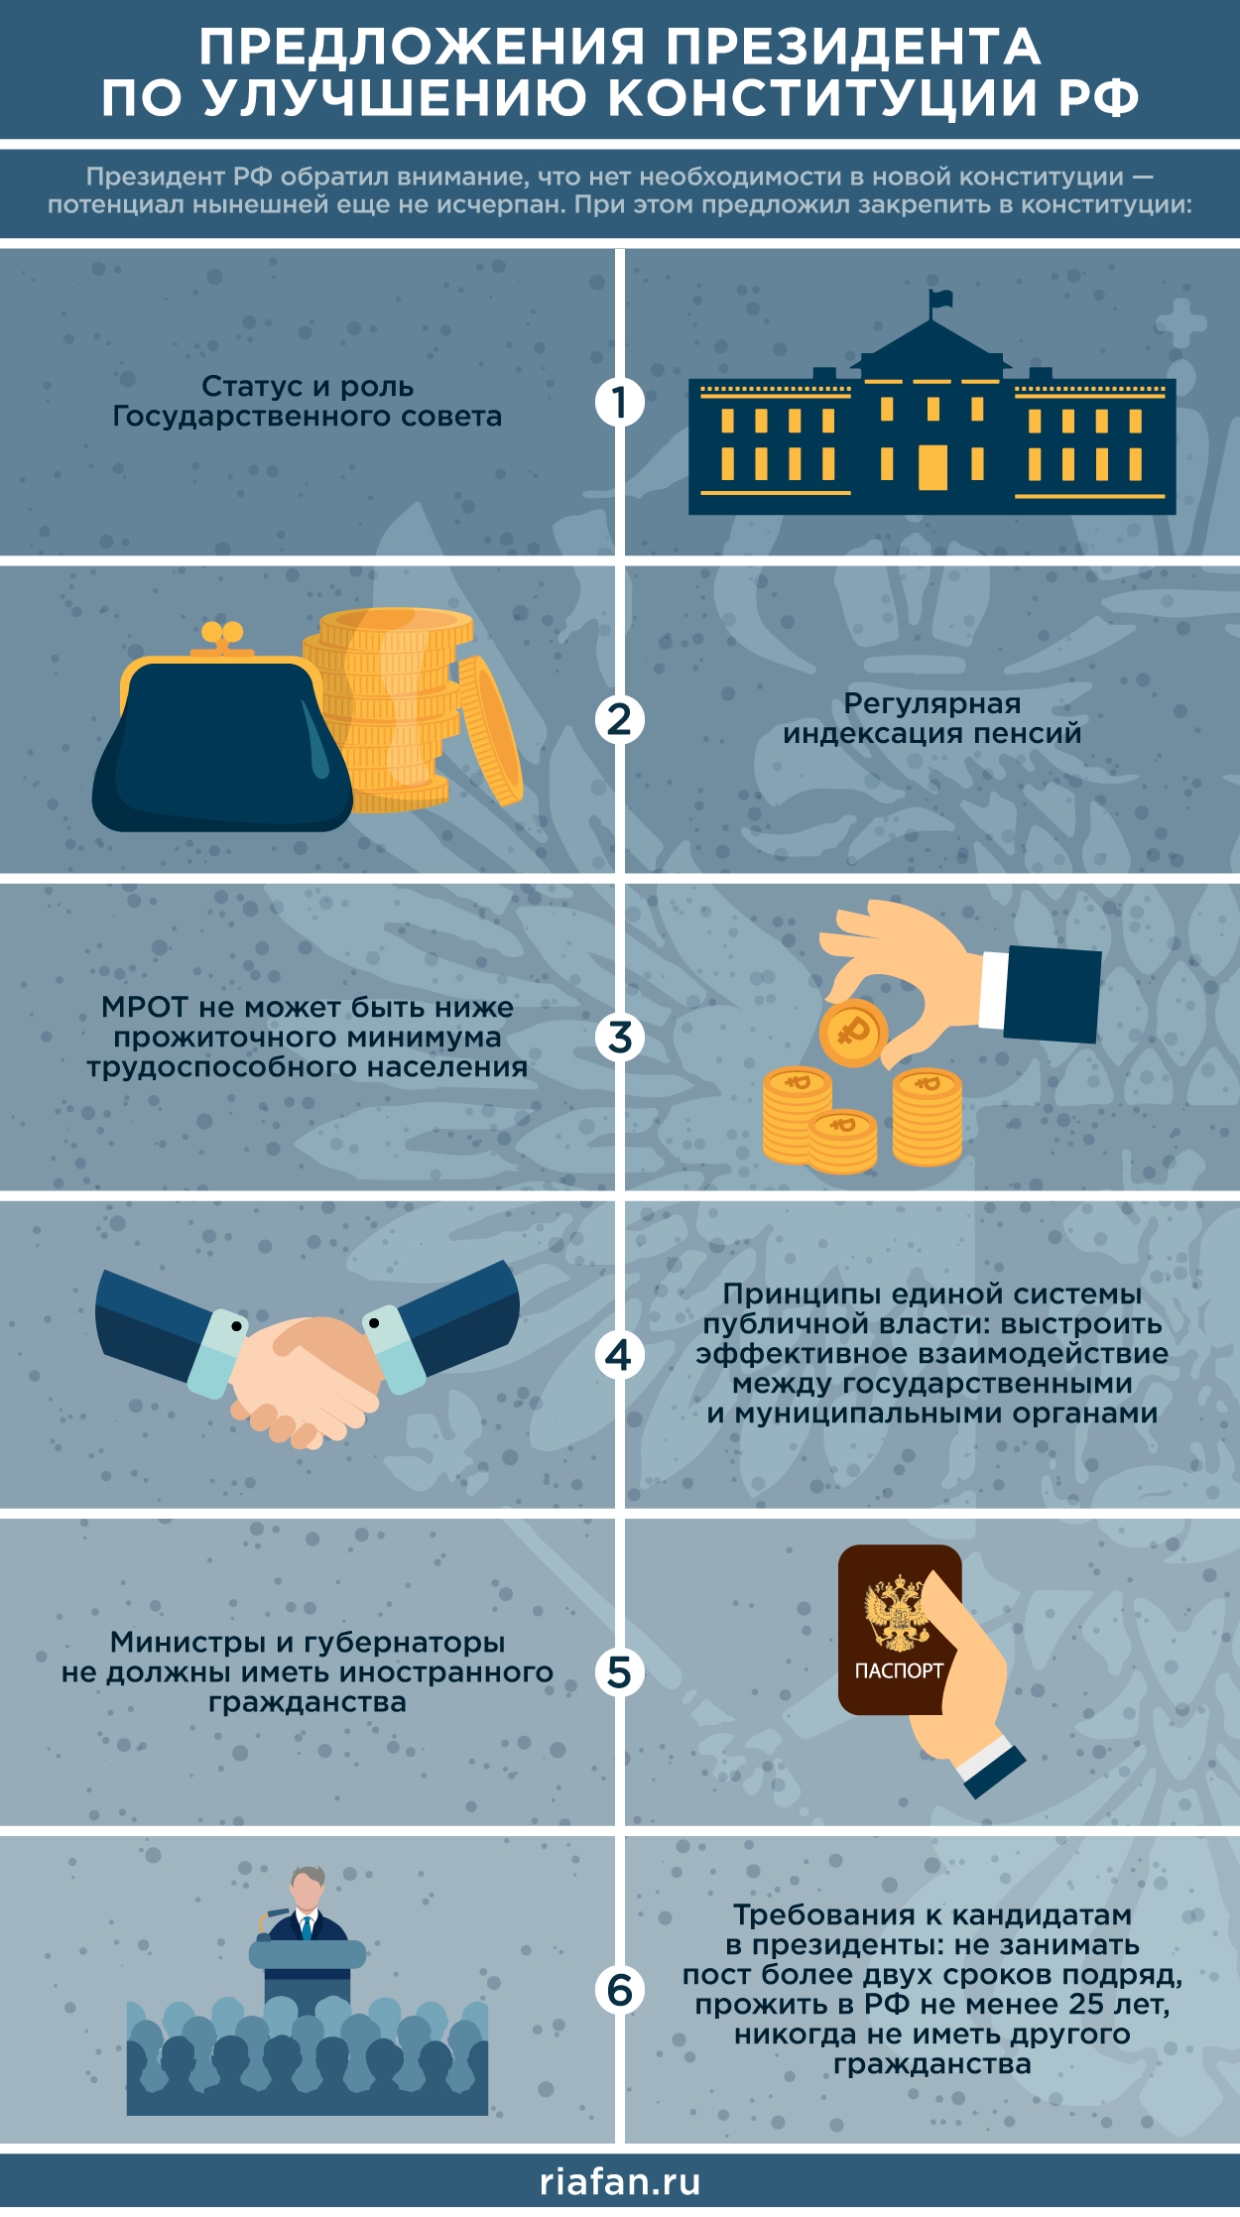 Russians explained, as a paid day off 22 April to vote on the constitution